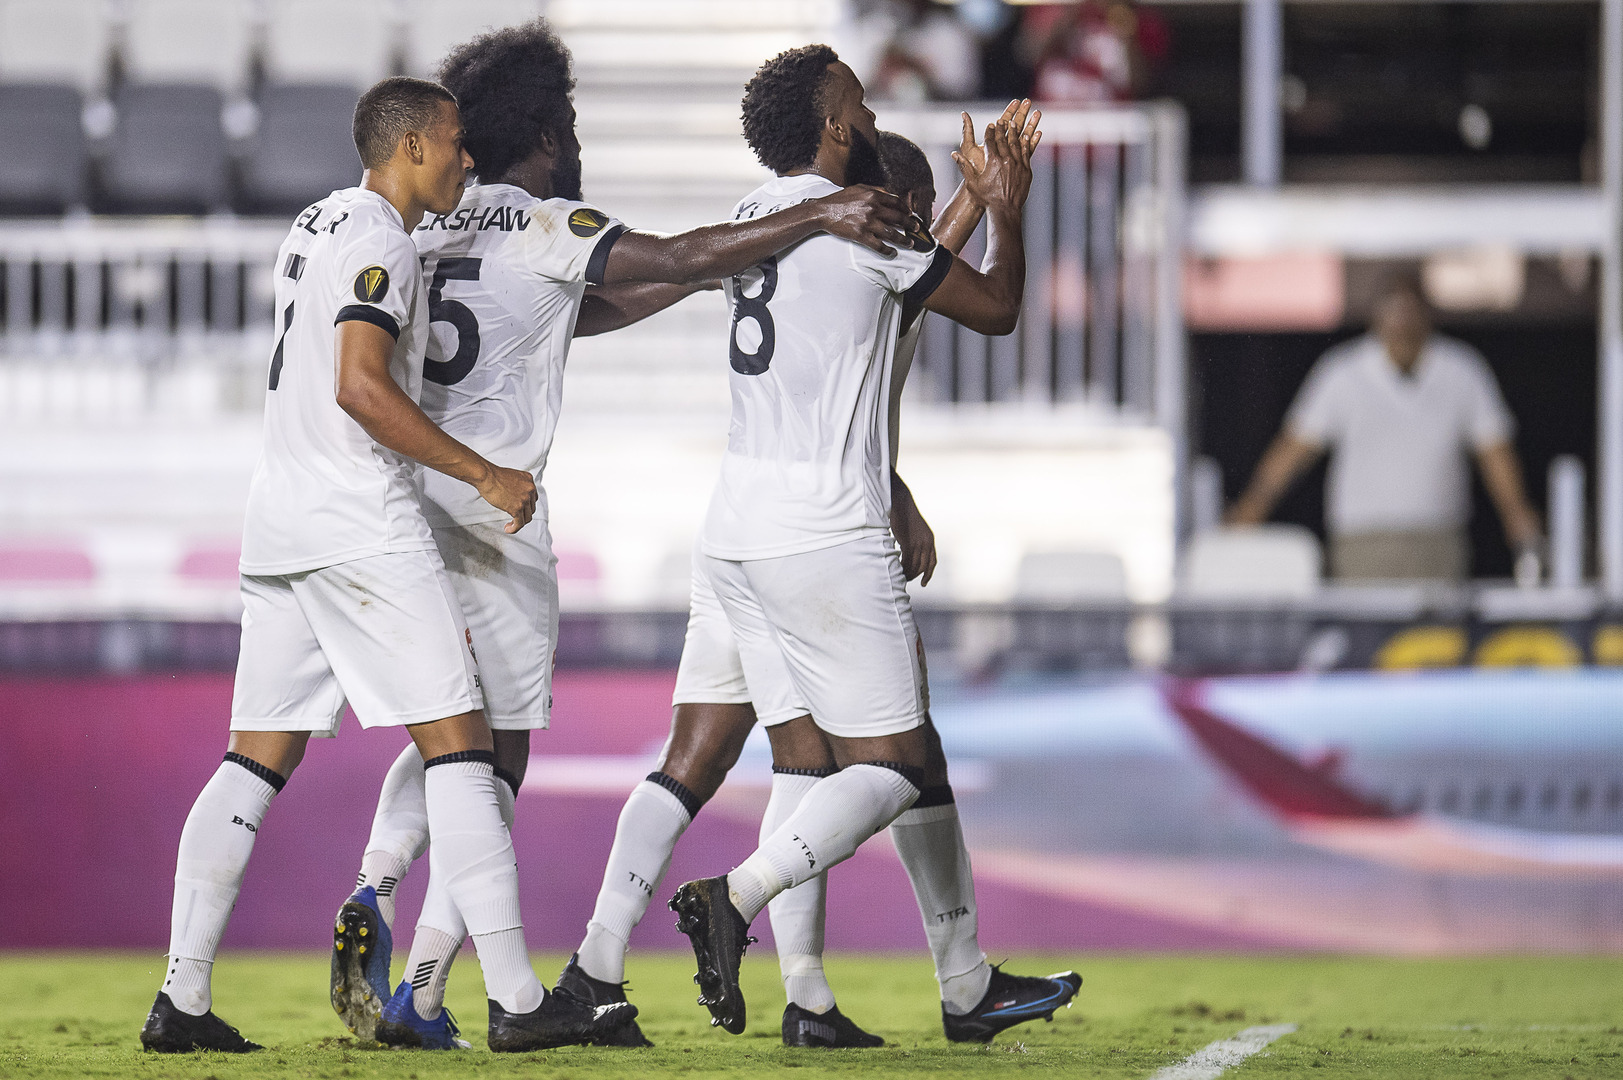 (L-R): Ryan Telfer, Neveal Hackshaw, Khaleem Hyland, and Kevin Molino celebrates Molino's successful penalty kick during a 2021 Concacaf Gold Cup Preliminary Round match against Montserrat at the DRV PNK Stadium, Ft. Lauderdale, FL on Friday, July 2nd 2021.